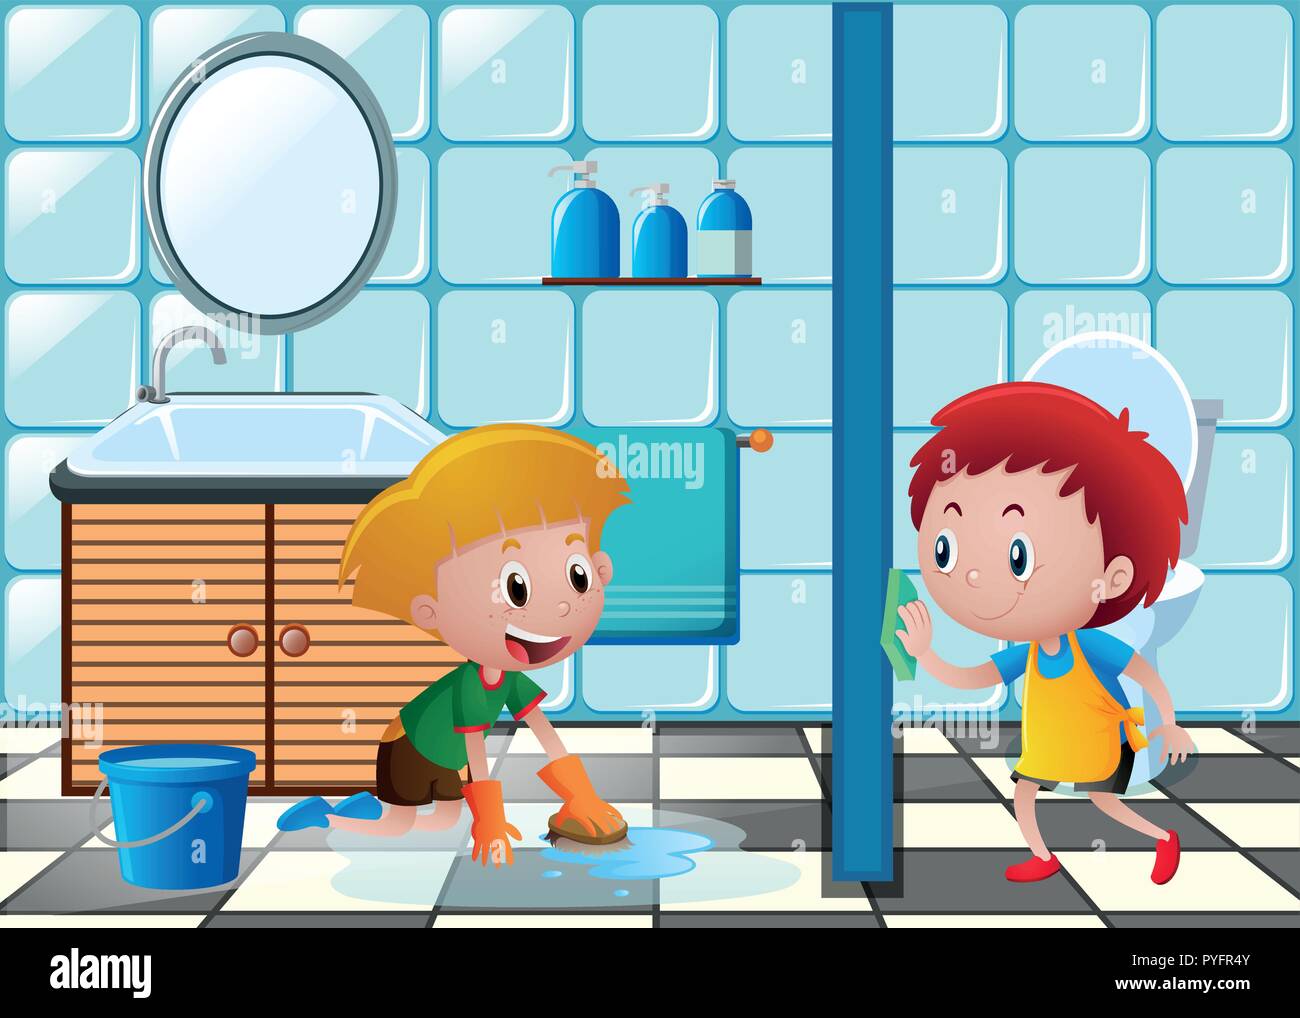 Two boys cleaning toilet illustration Stock Vector